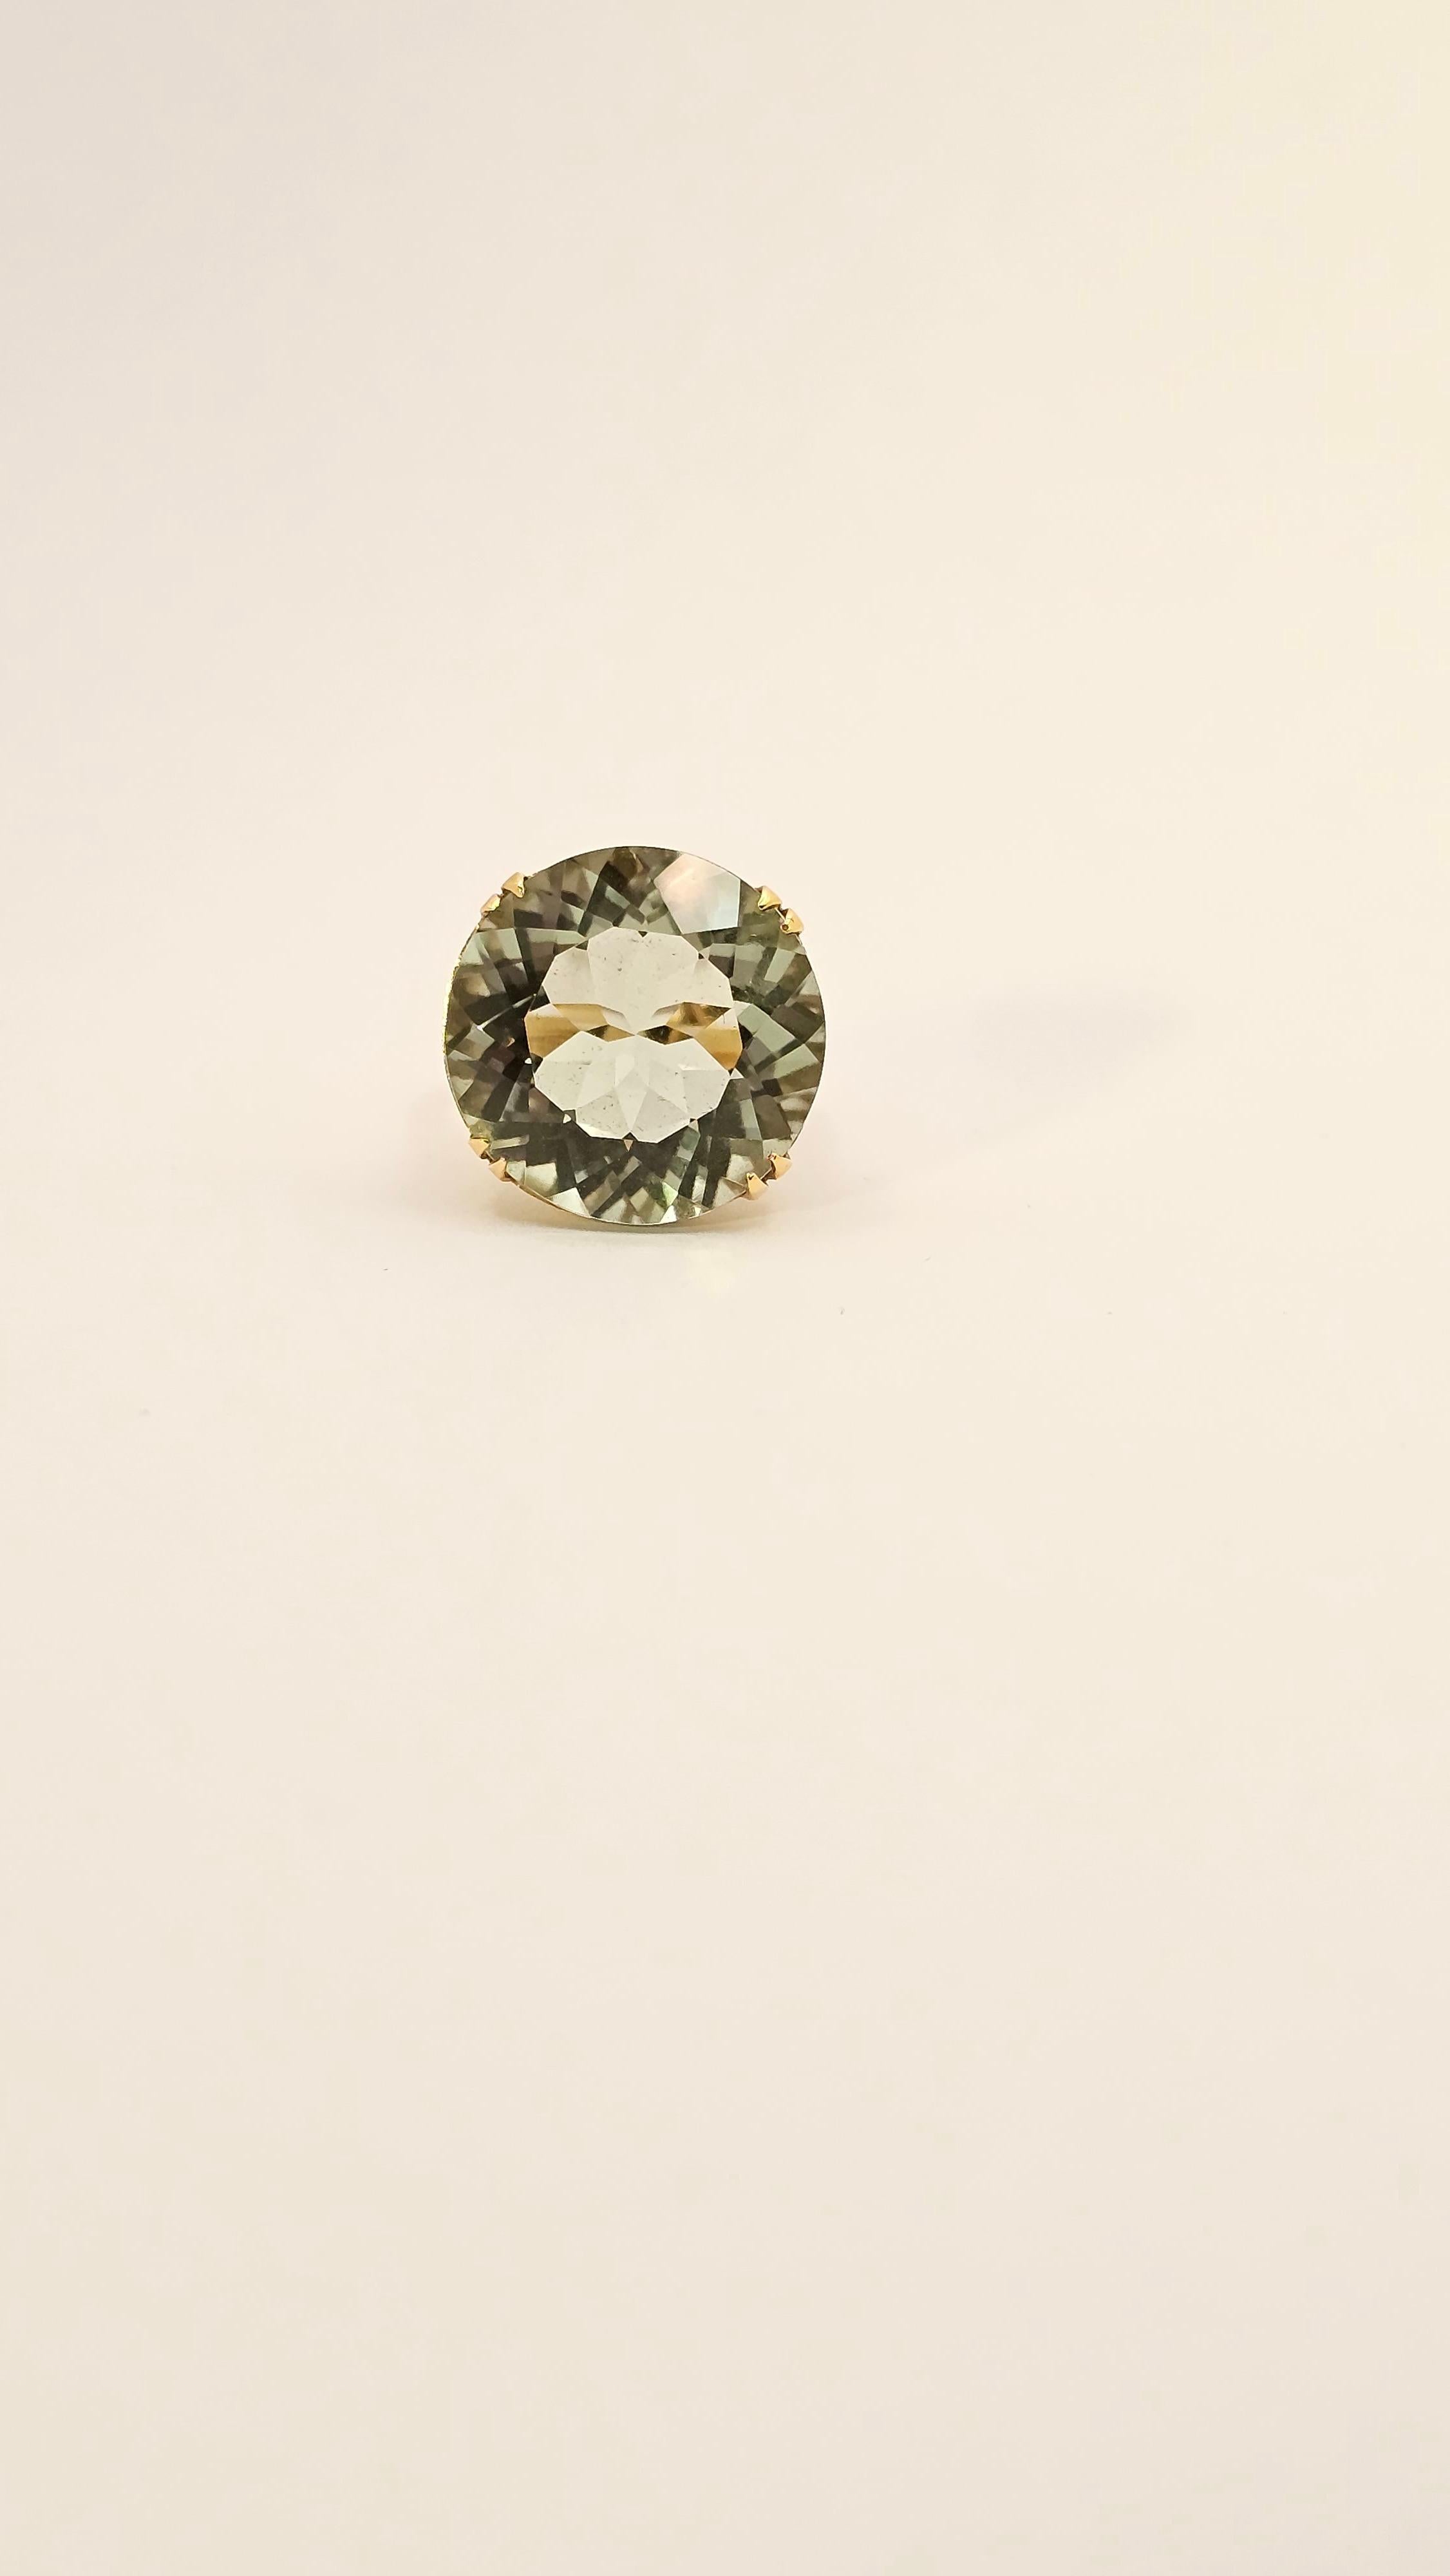 An 18 kt yellow gold, solid ring with a retro style but contemporary dimensions.
The stone is a green Amethyst, its name in gemology is Prasiolite. It has a light green color with a hint of yellow that is absolutely unique and goes well with any